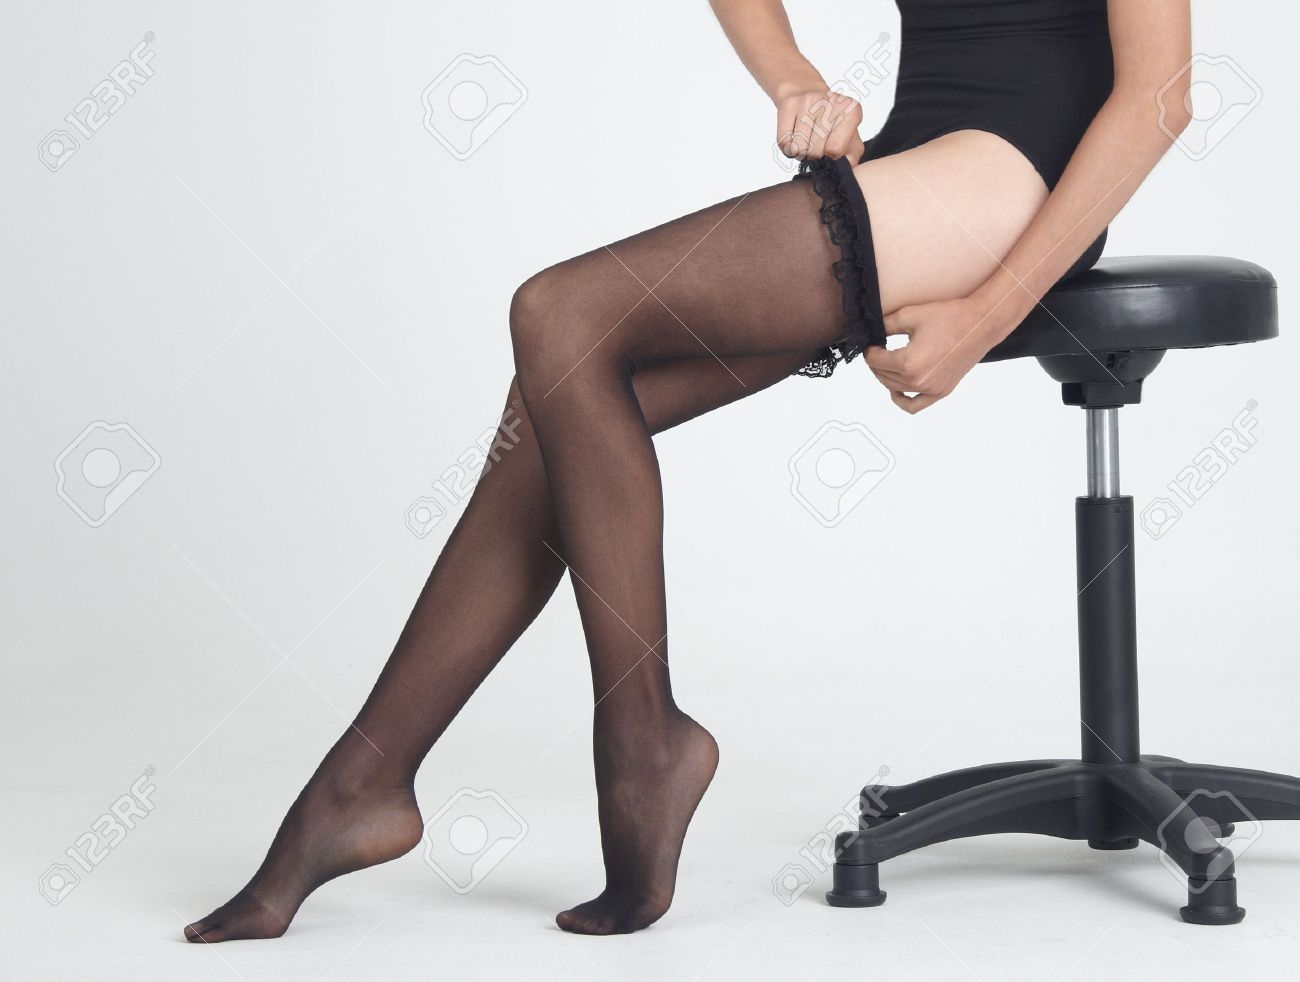 alicia mccann recommends woman putting stockings on pic